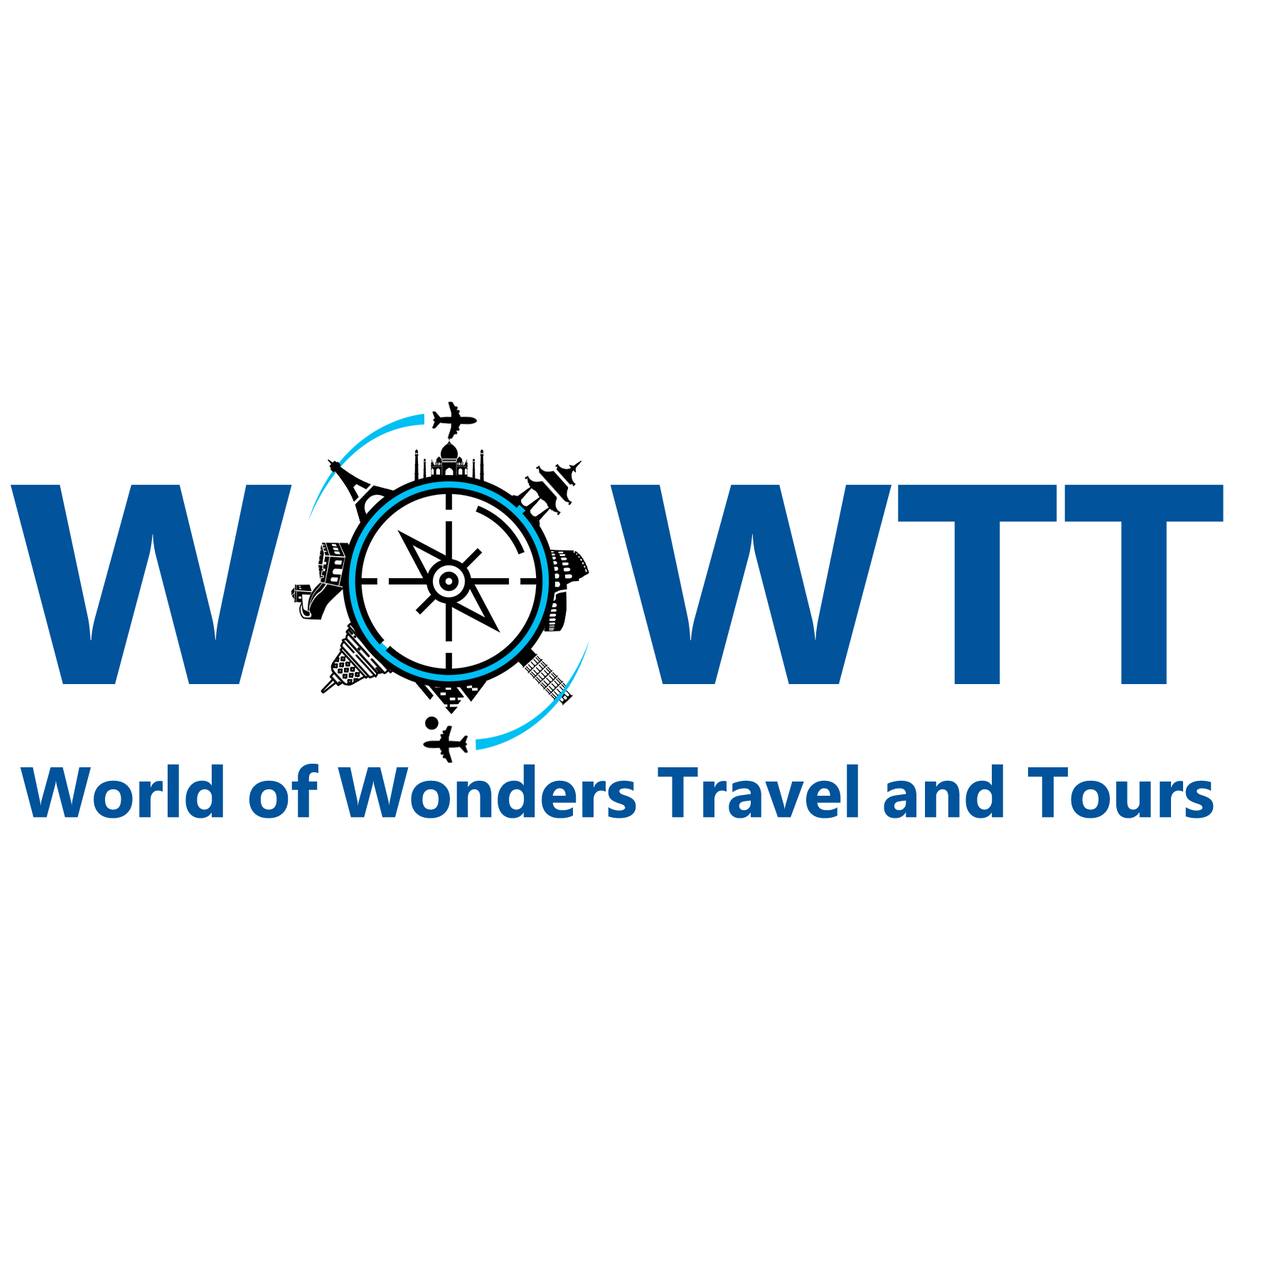 World of Wonders Travel and Tours LOGO